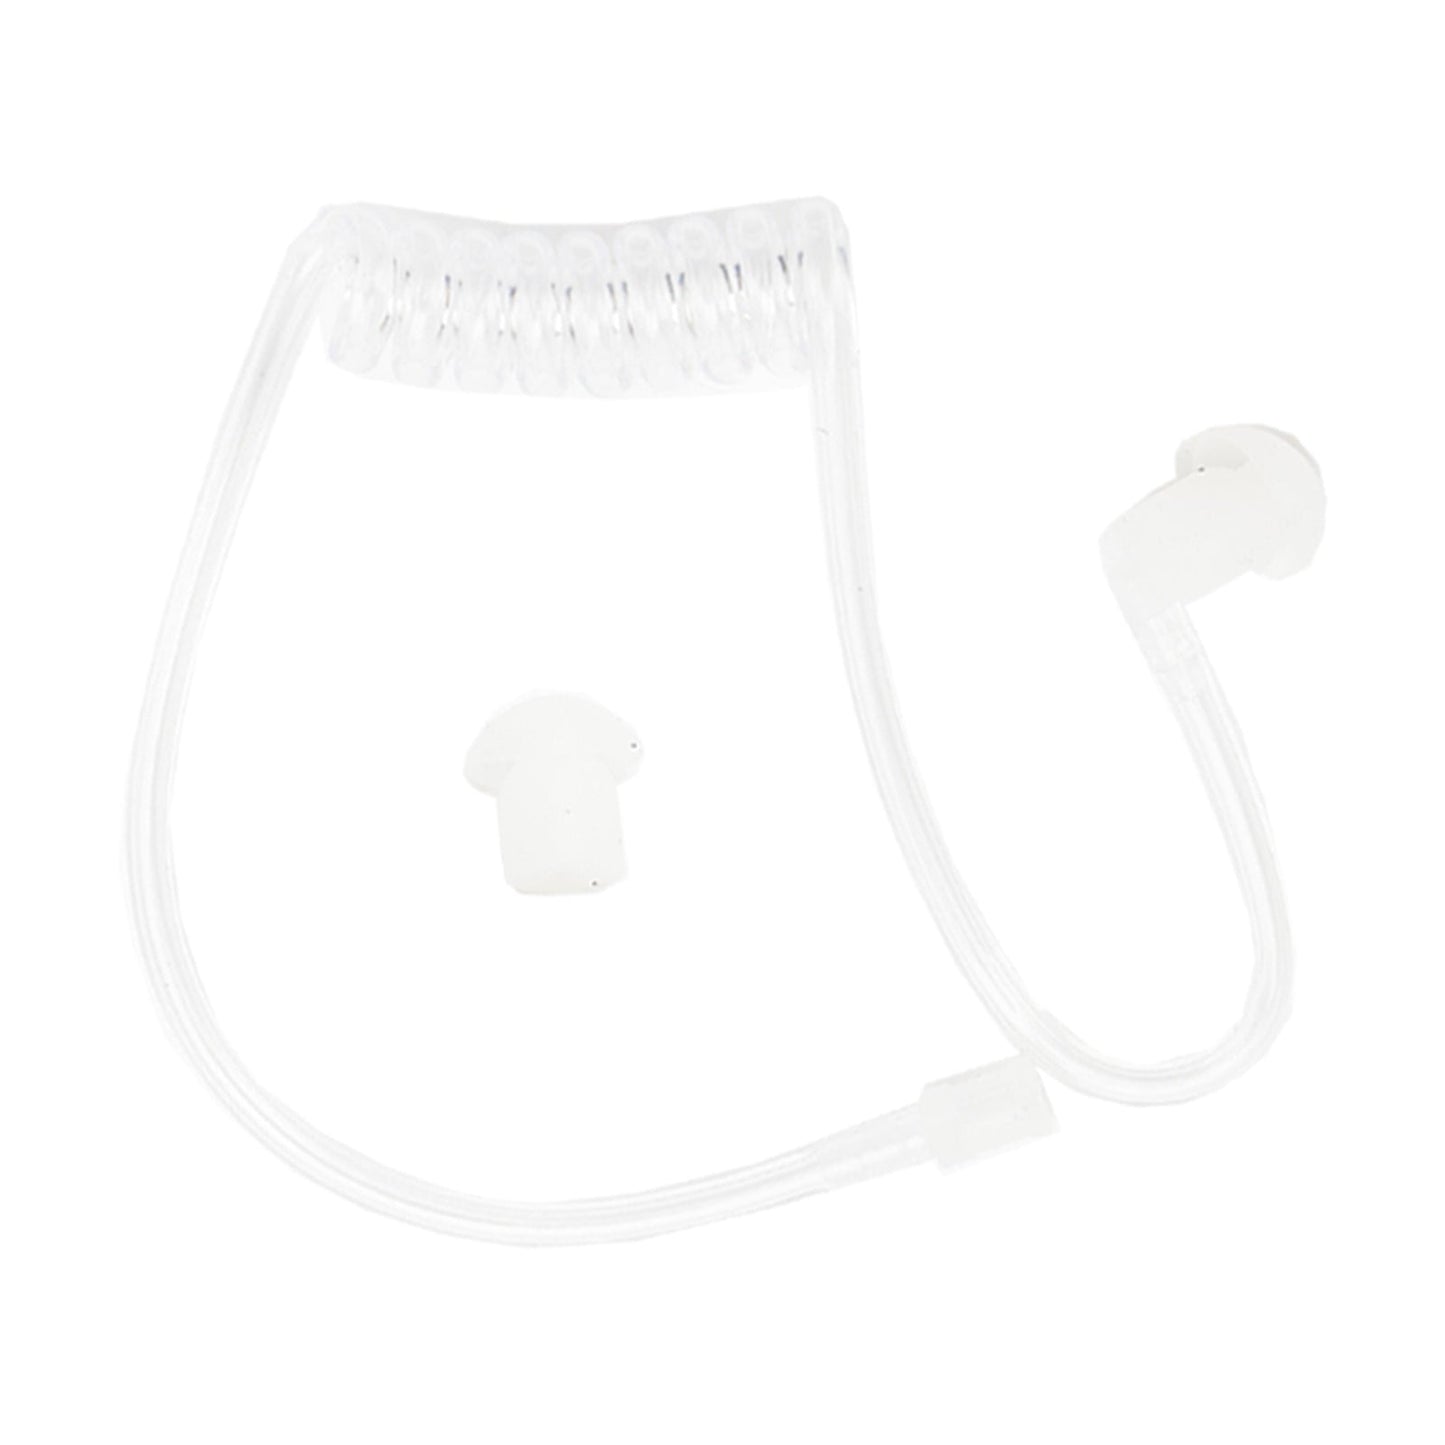 For STP8000 STP8030 STP8035 6-Pin PTT 7.1-A3 Transparent Tube Headset with Mic